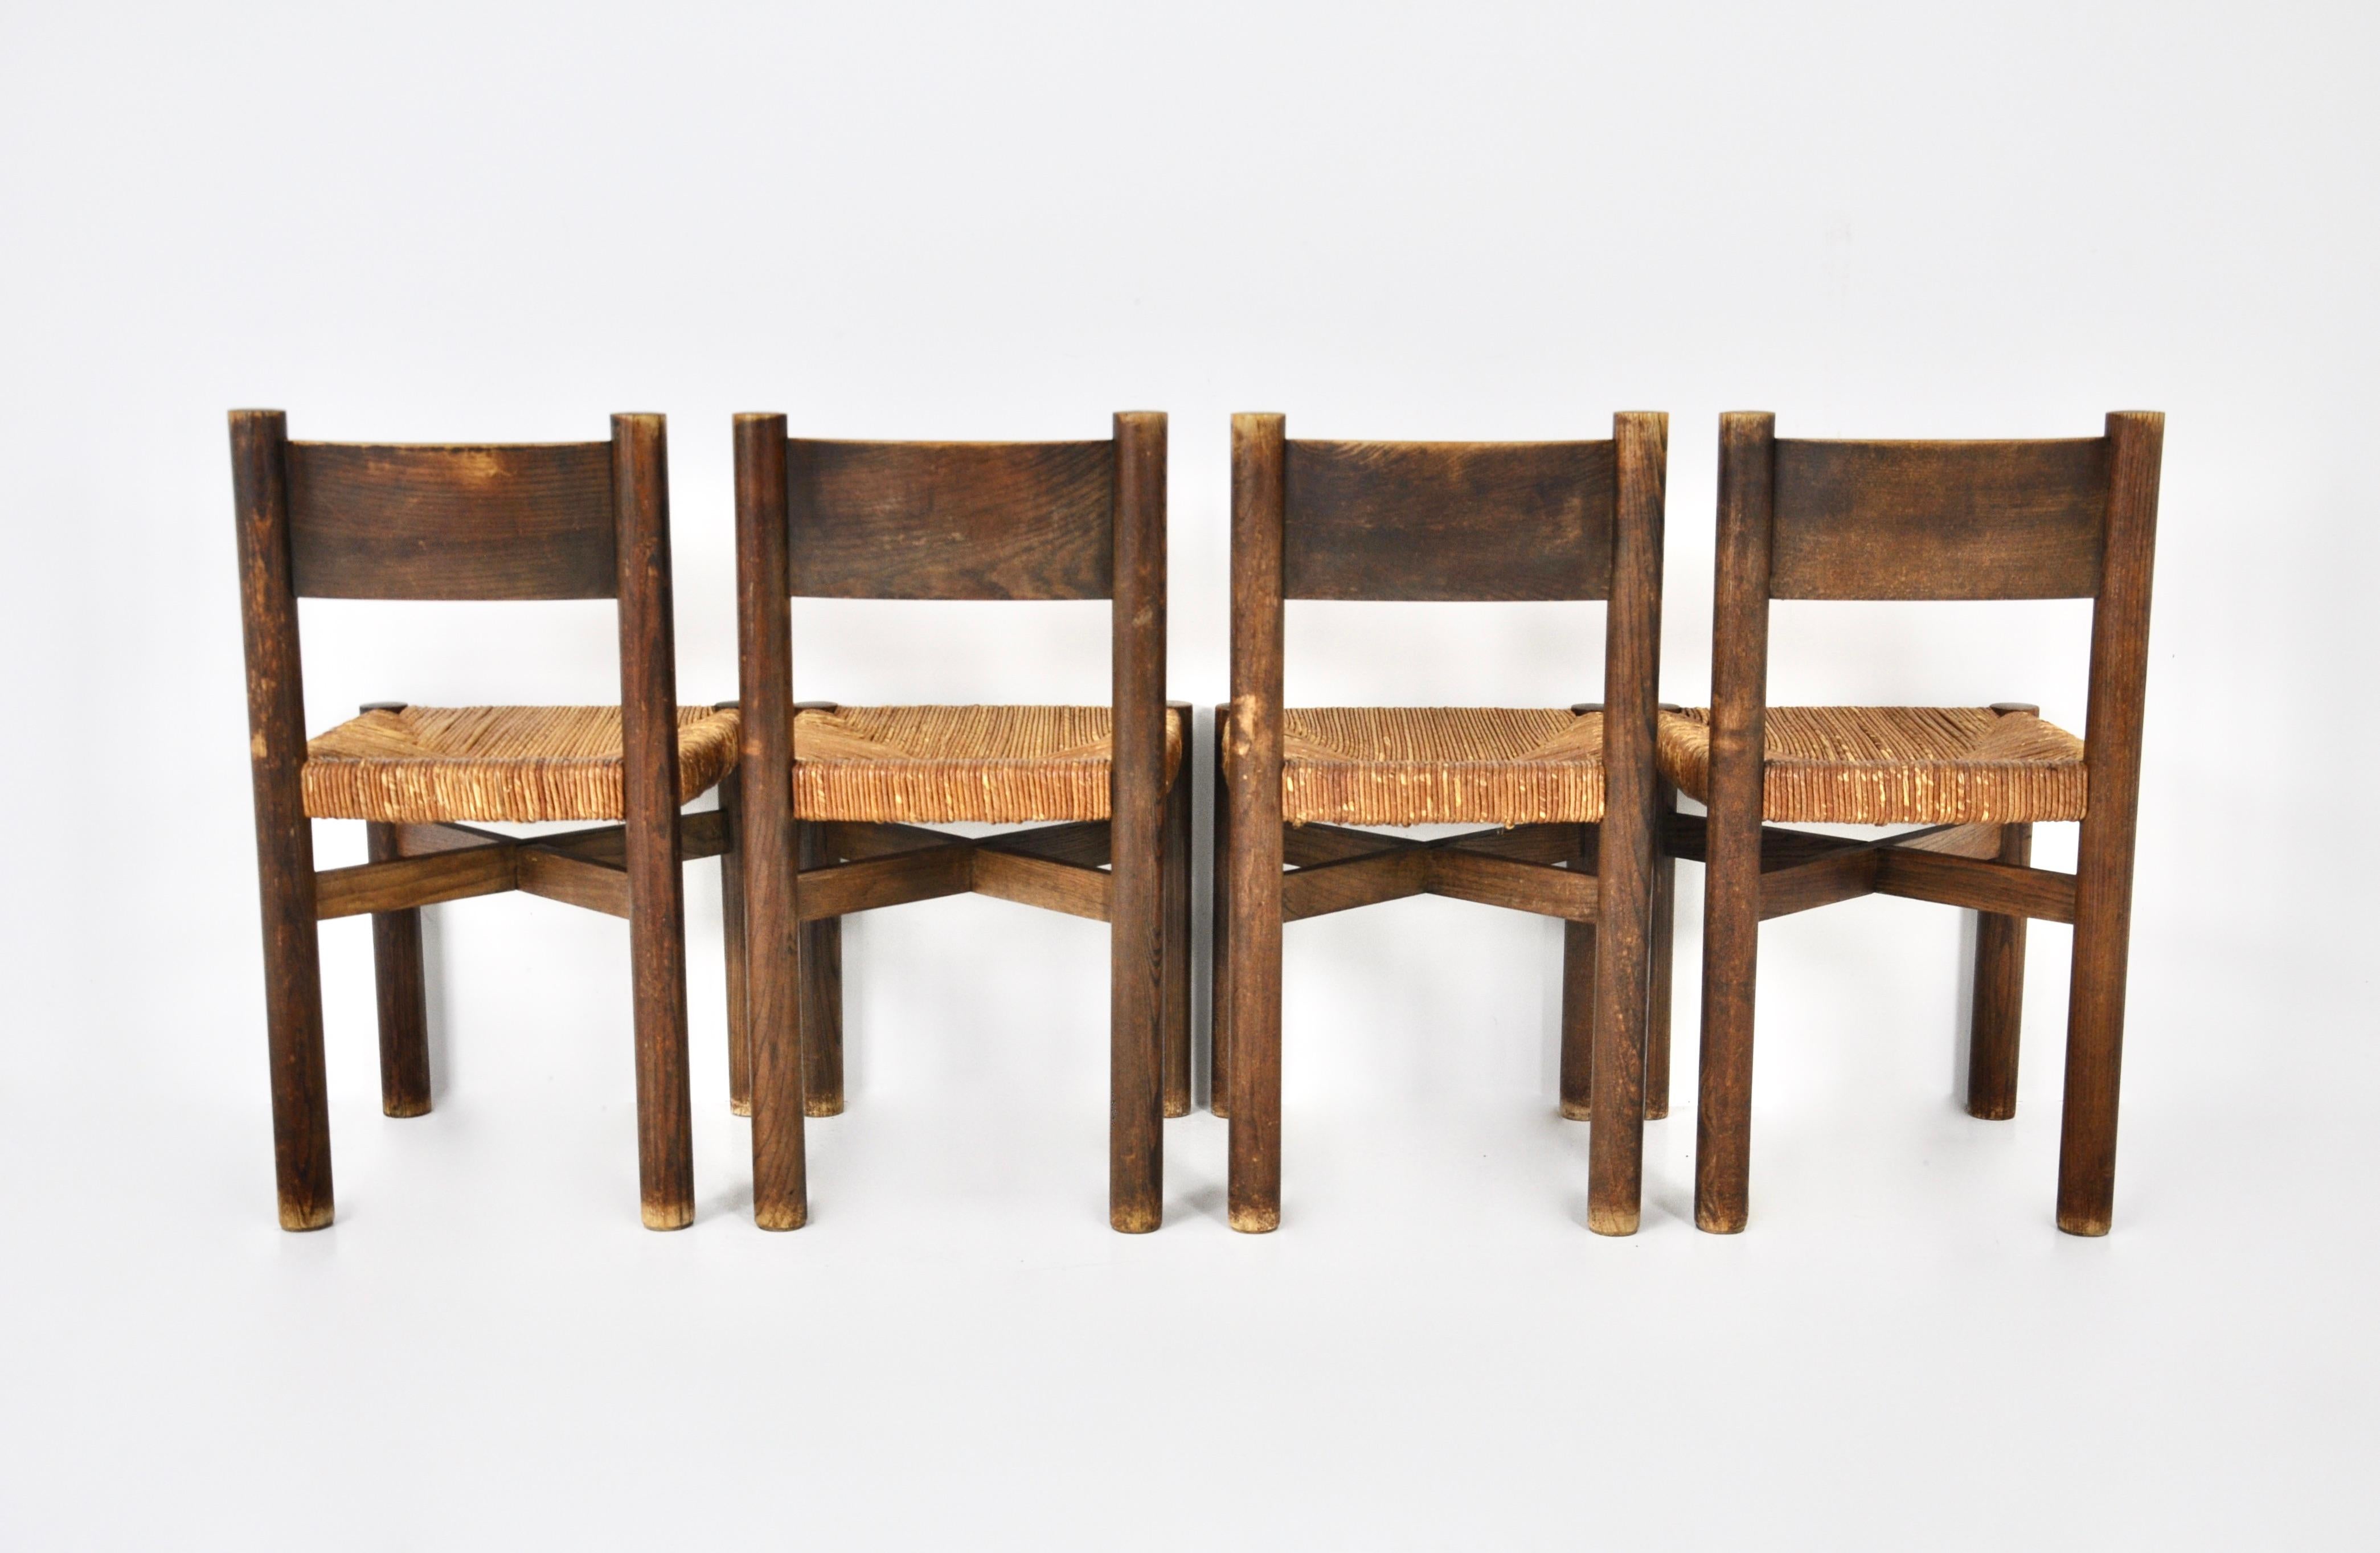 Mid-20th Century Meribel chairs by Charlotte Perriand for Steph Simon, 1950s, set of 4 For Sale